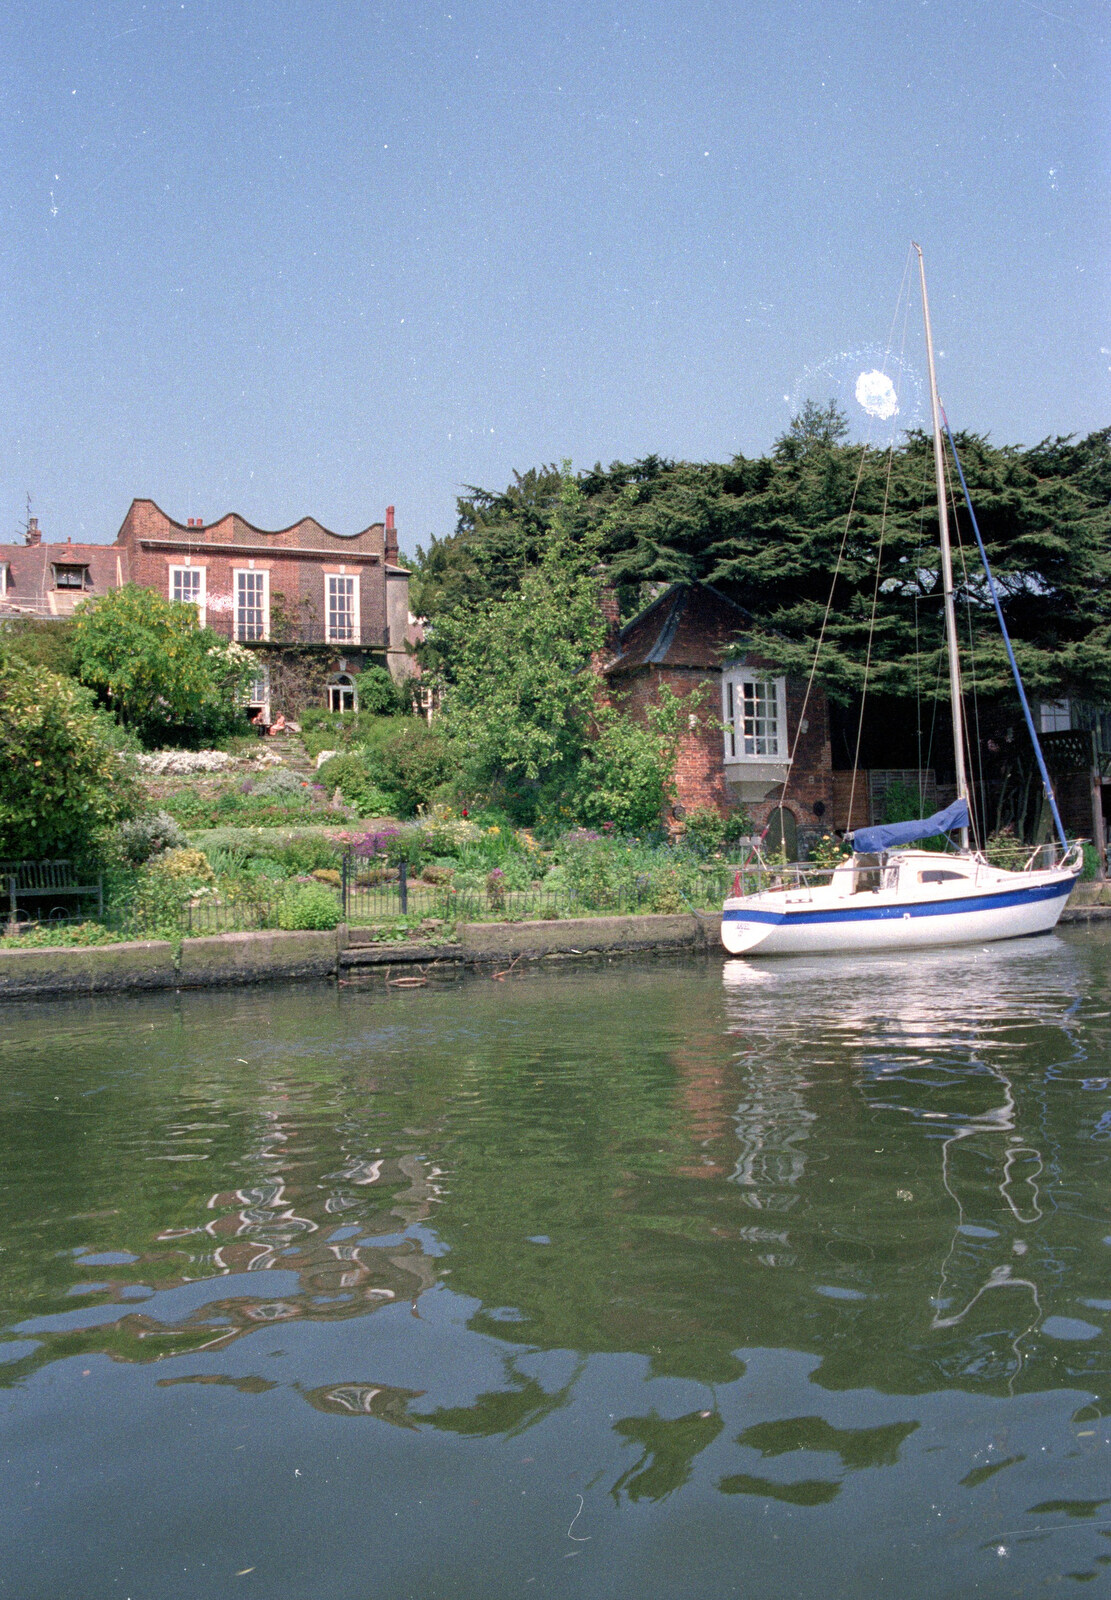 A boat moored on the river from The Plymouth Gang Visits Nosher in the Sticks, Red House, Buxton, Norfolk - 20th May 1988